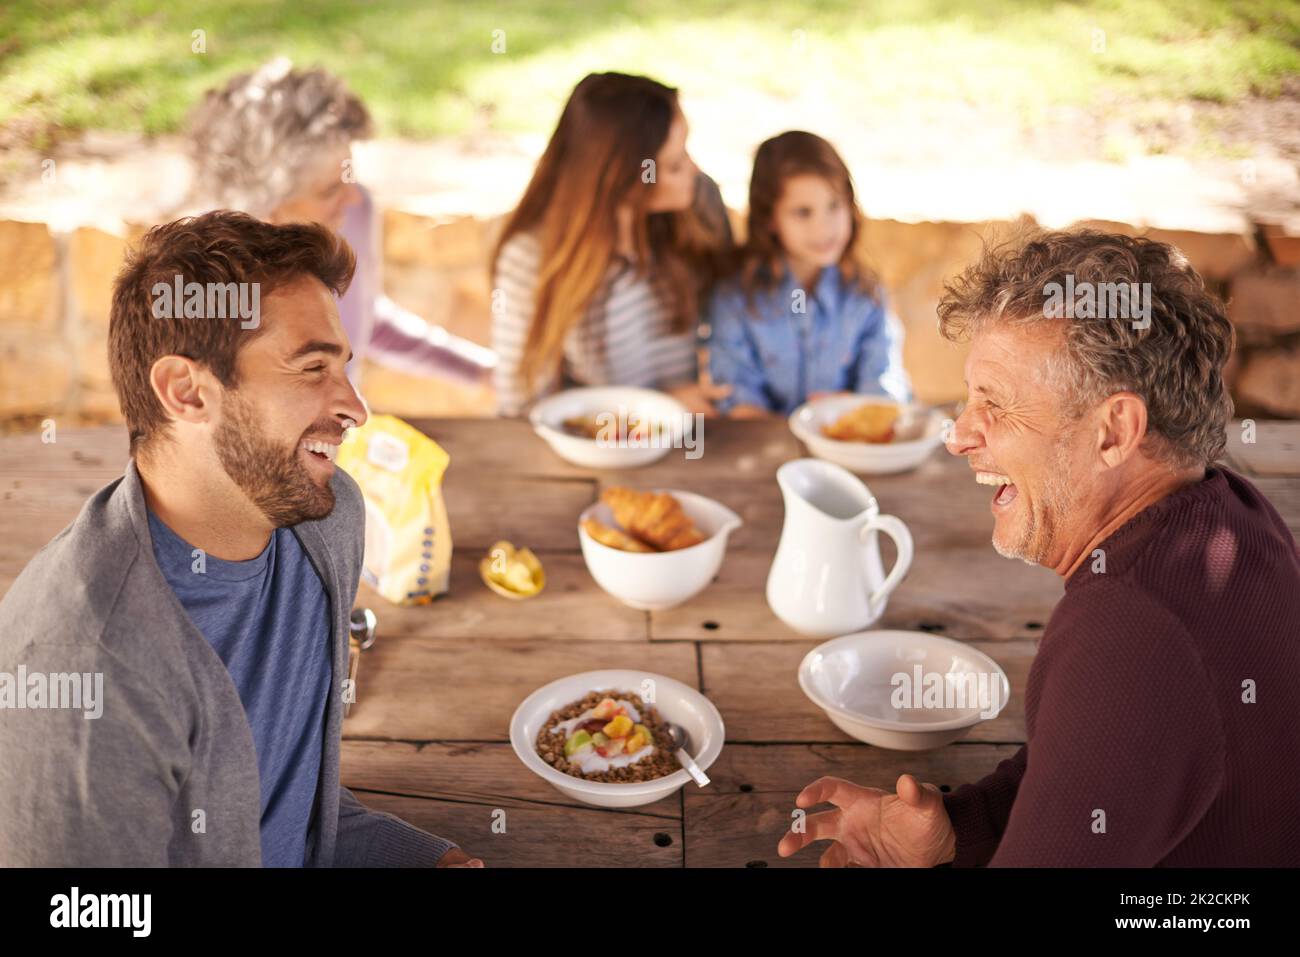 Starting the day with breakfast and laughter. Cropped shot of a family having a meal together outside. Stock Photo